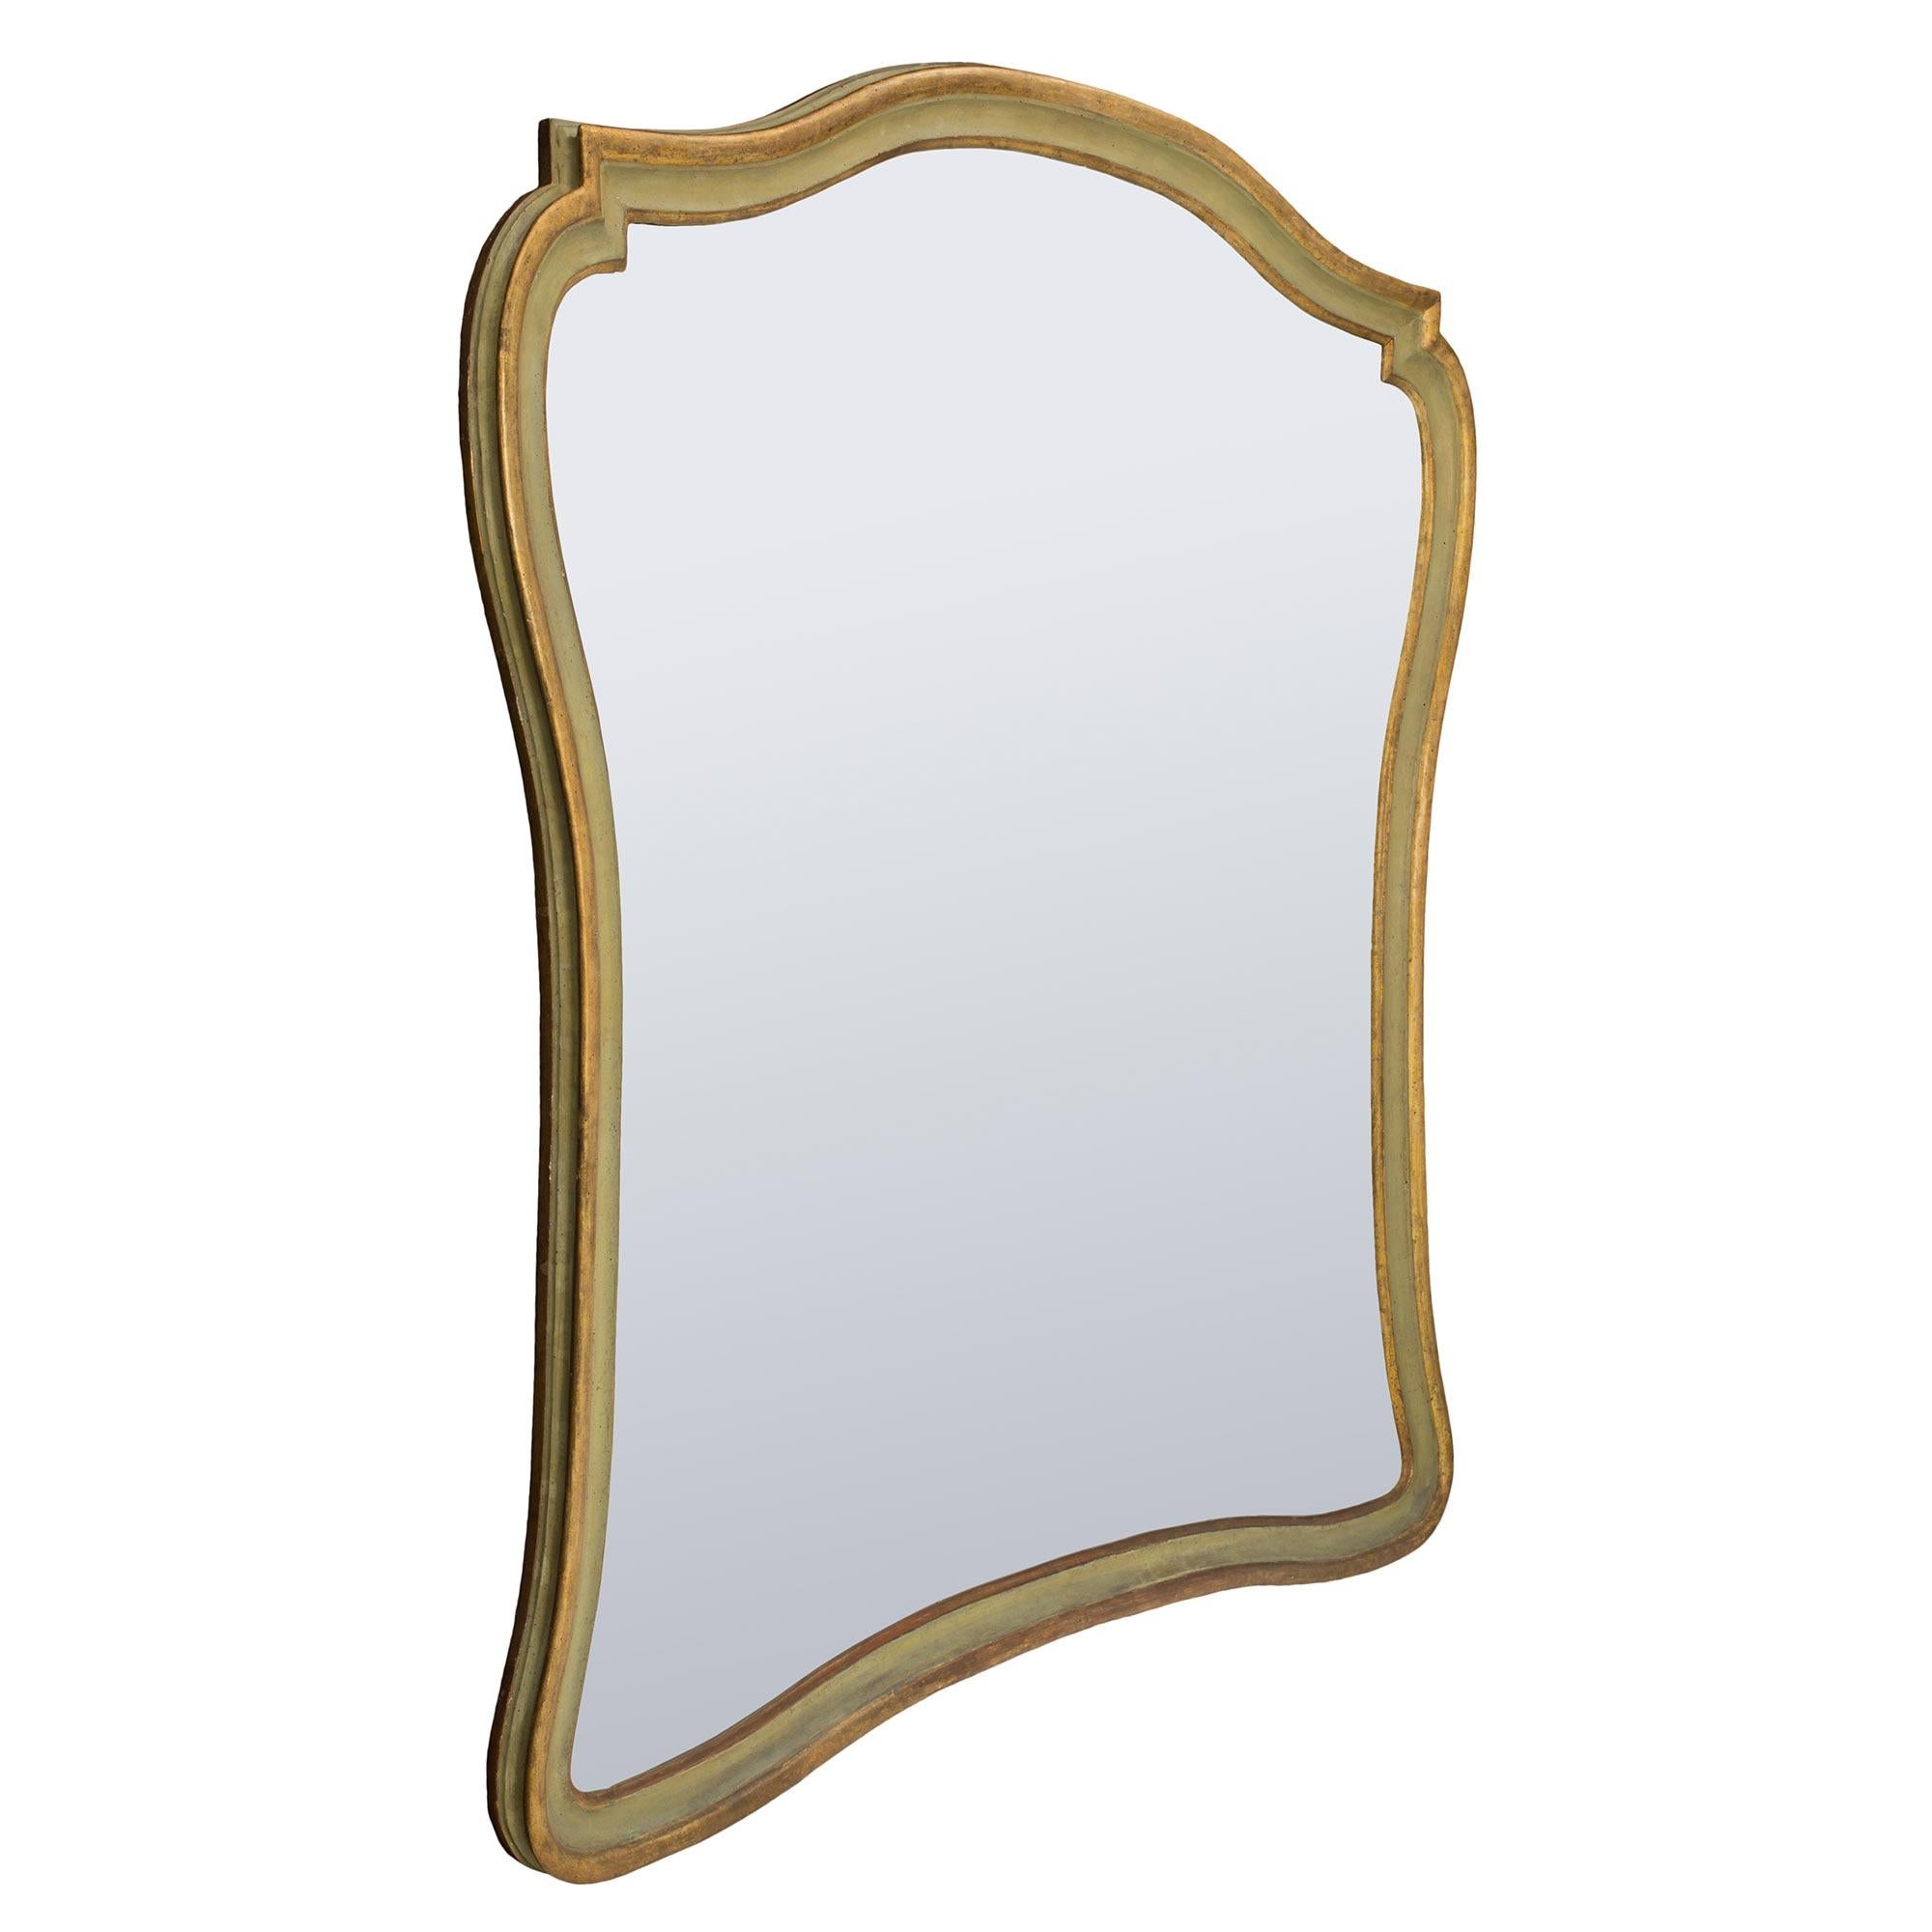 A beautiful and unique complete set of four Italian 18th century Genovese mecca and patinated mirrors. Each large scale mirror plate is framed within an elegant and most decorative lightly curved mottled frame. The frame displays a patinated green